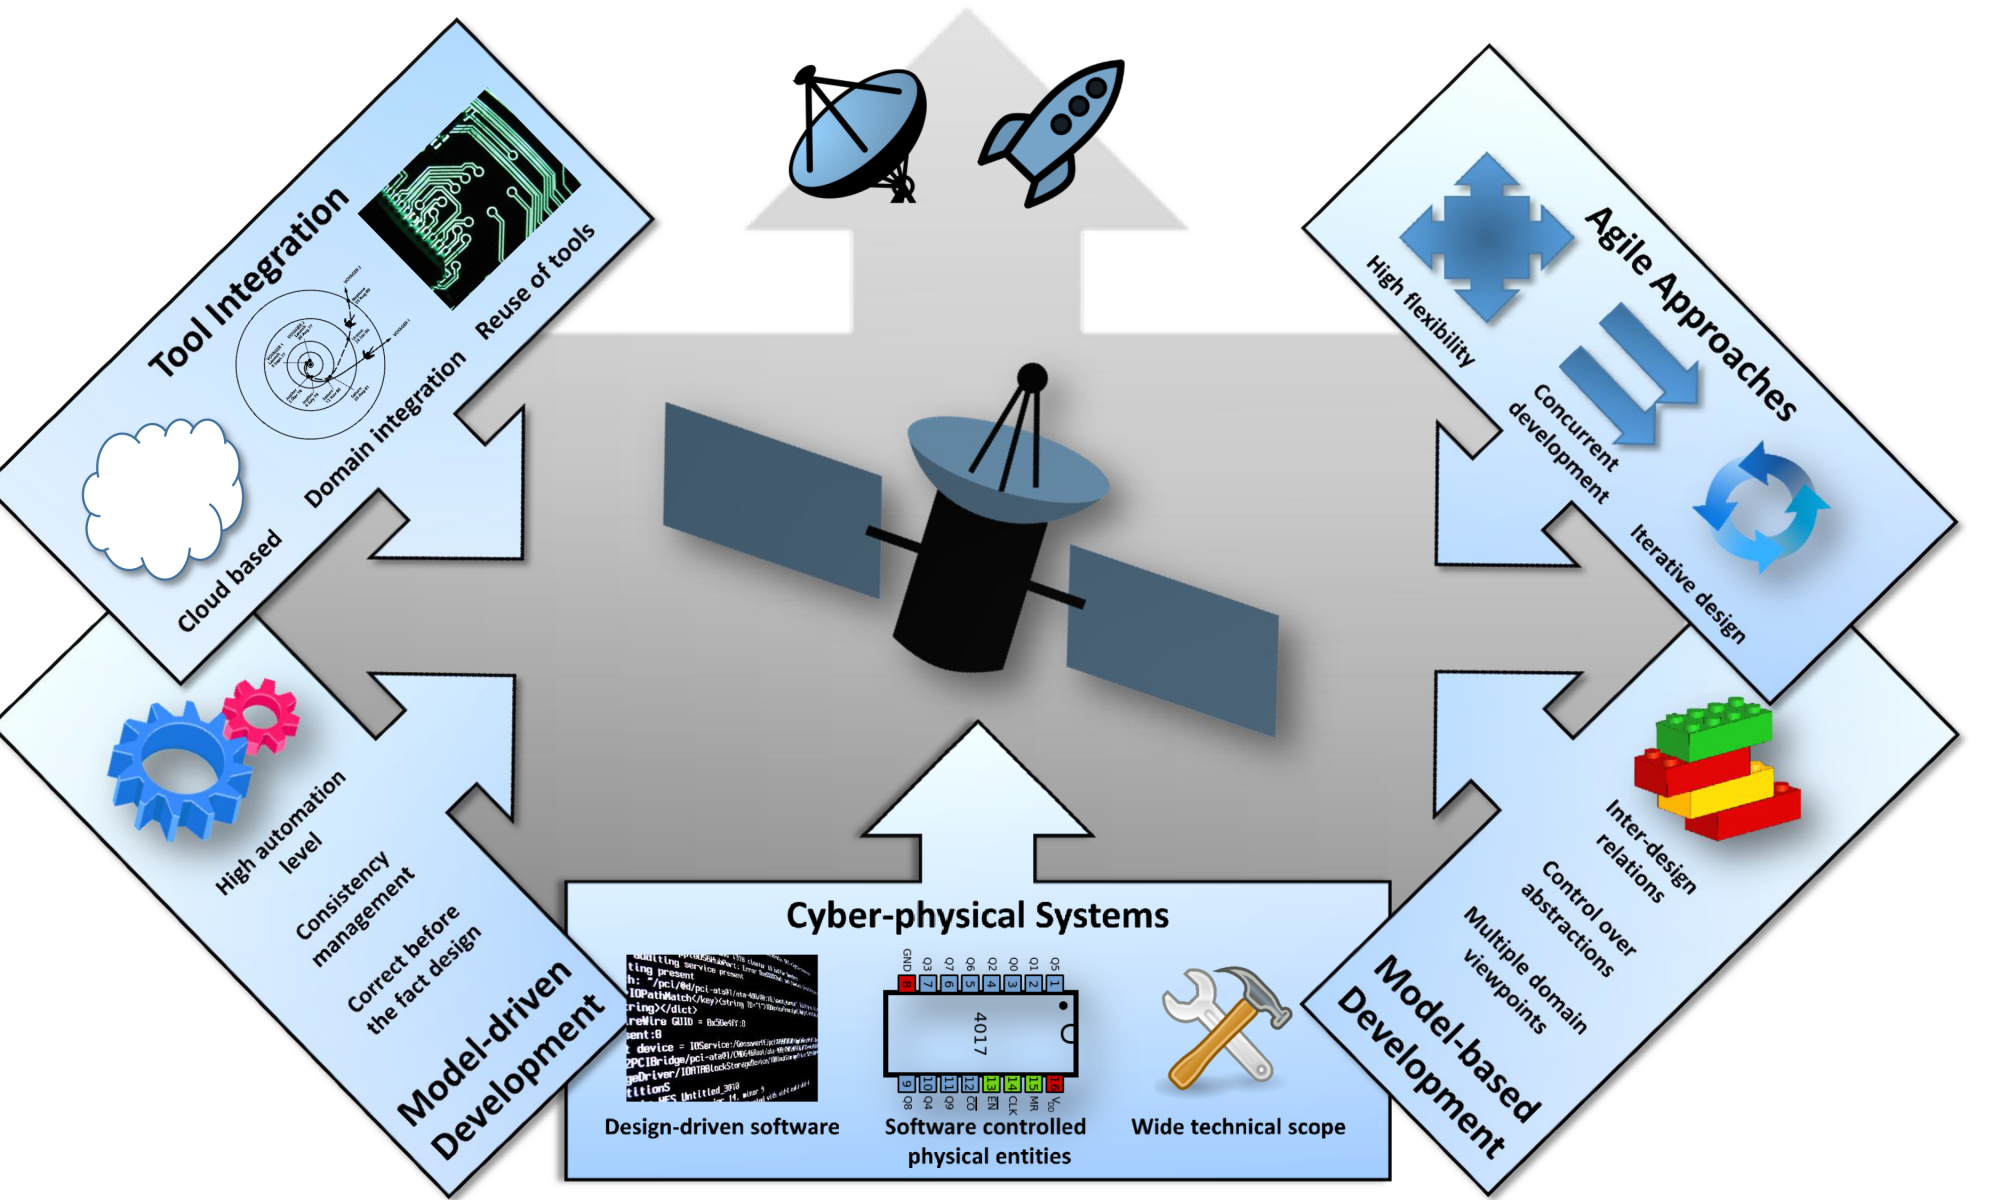 Satellite development as cyber-physical systems